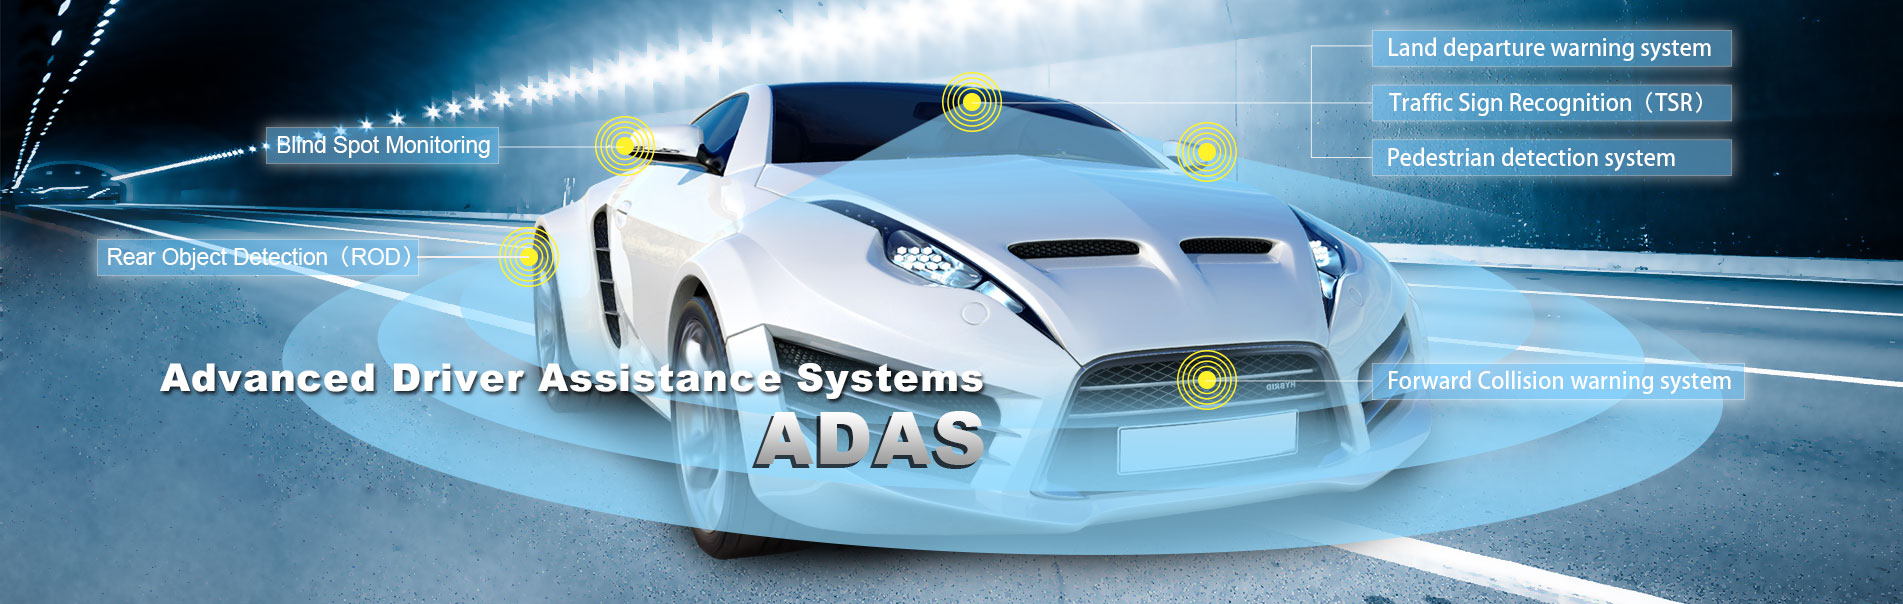 Advanced Driver Assistance System (ADAS) Market Size, Share, Growth, Trend by Application, Type - Industry Analysis and Forecast